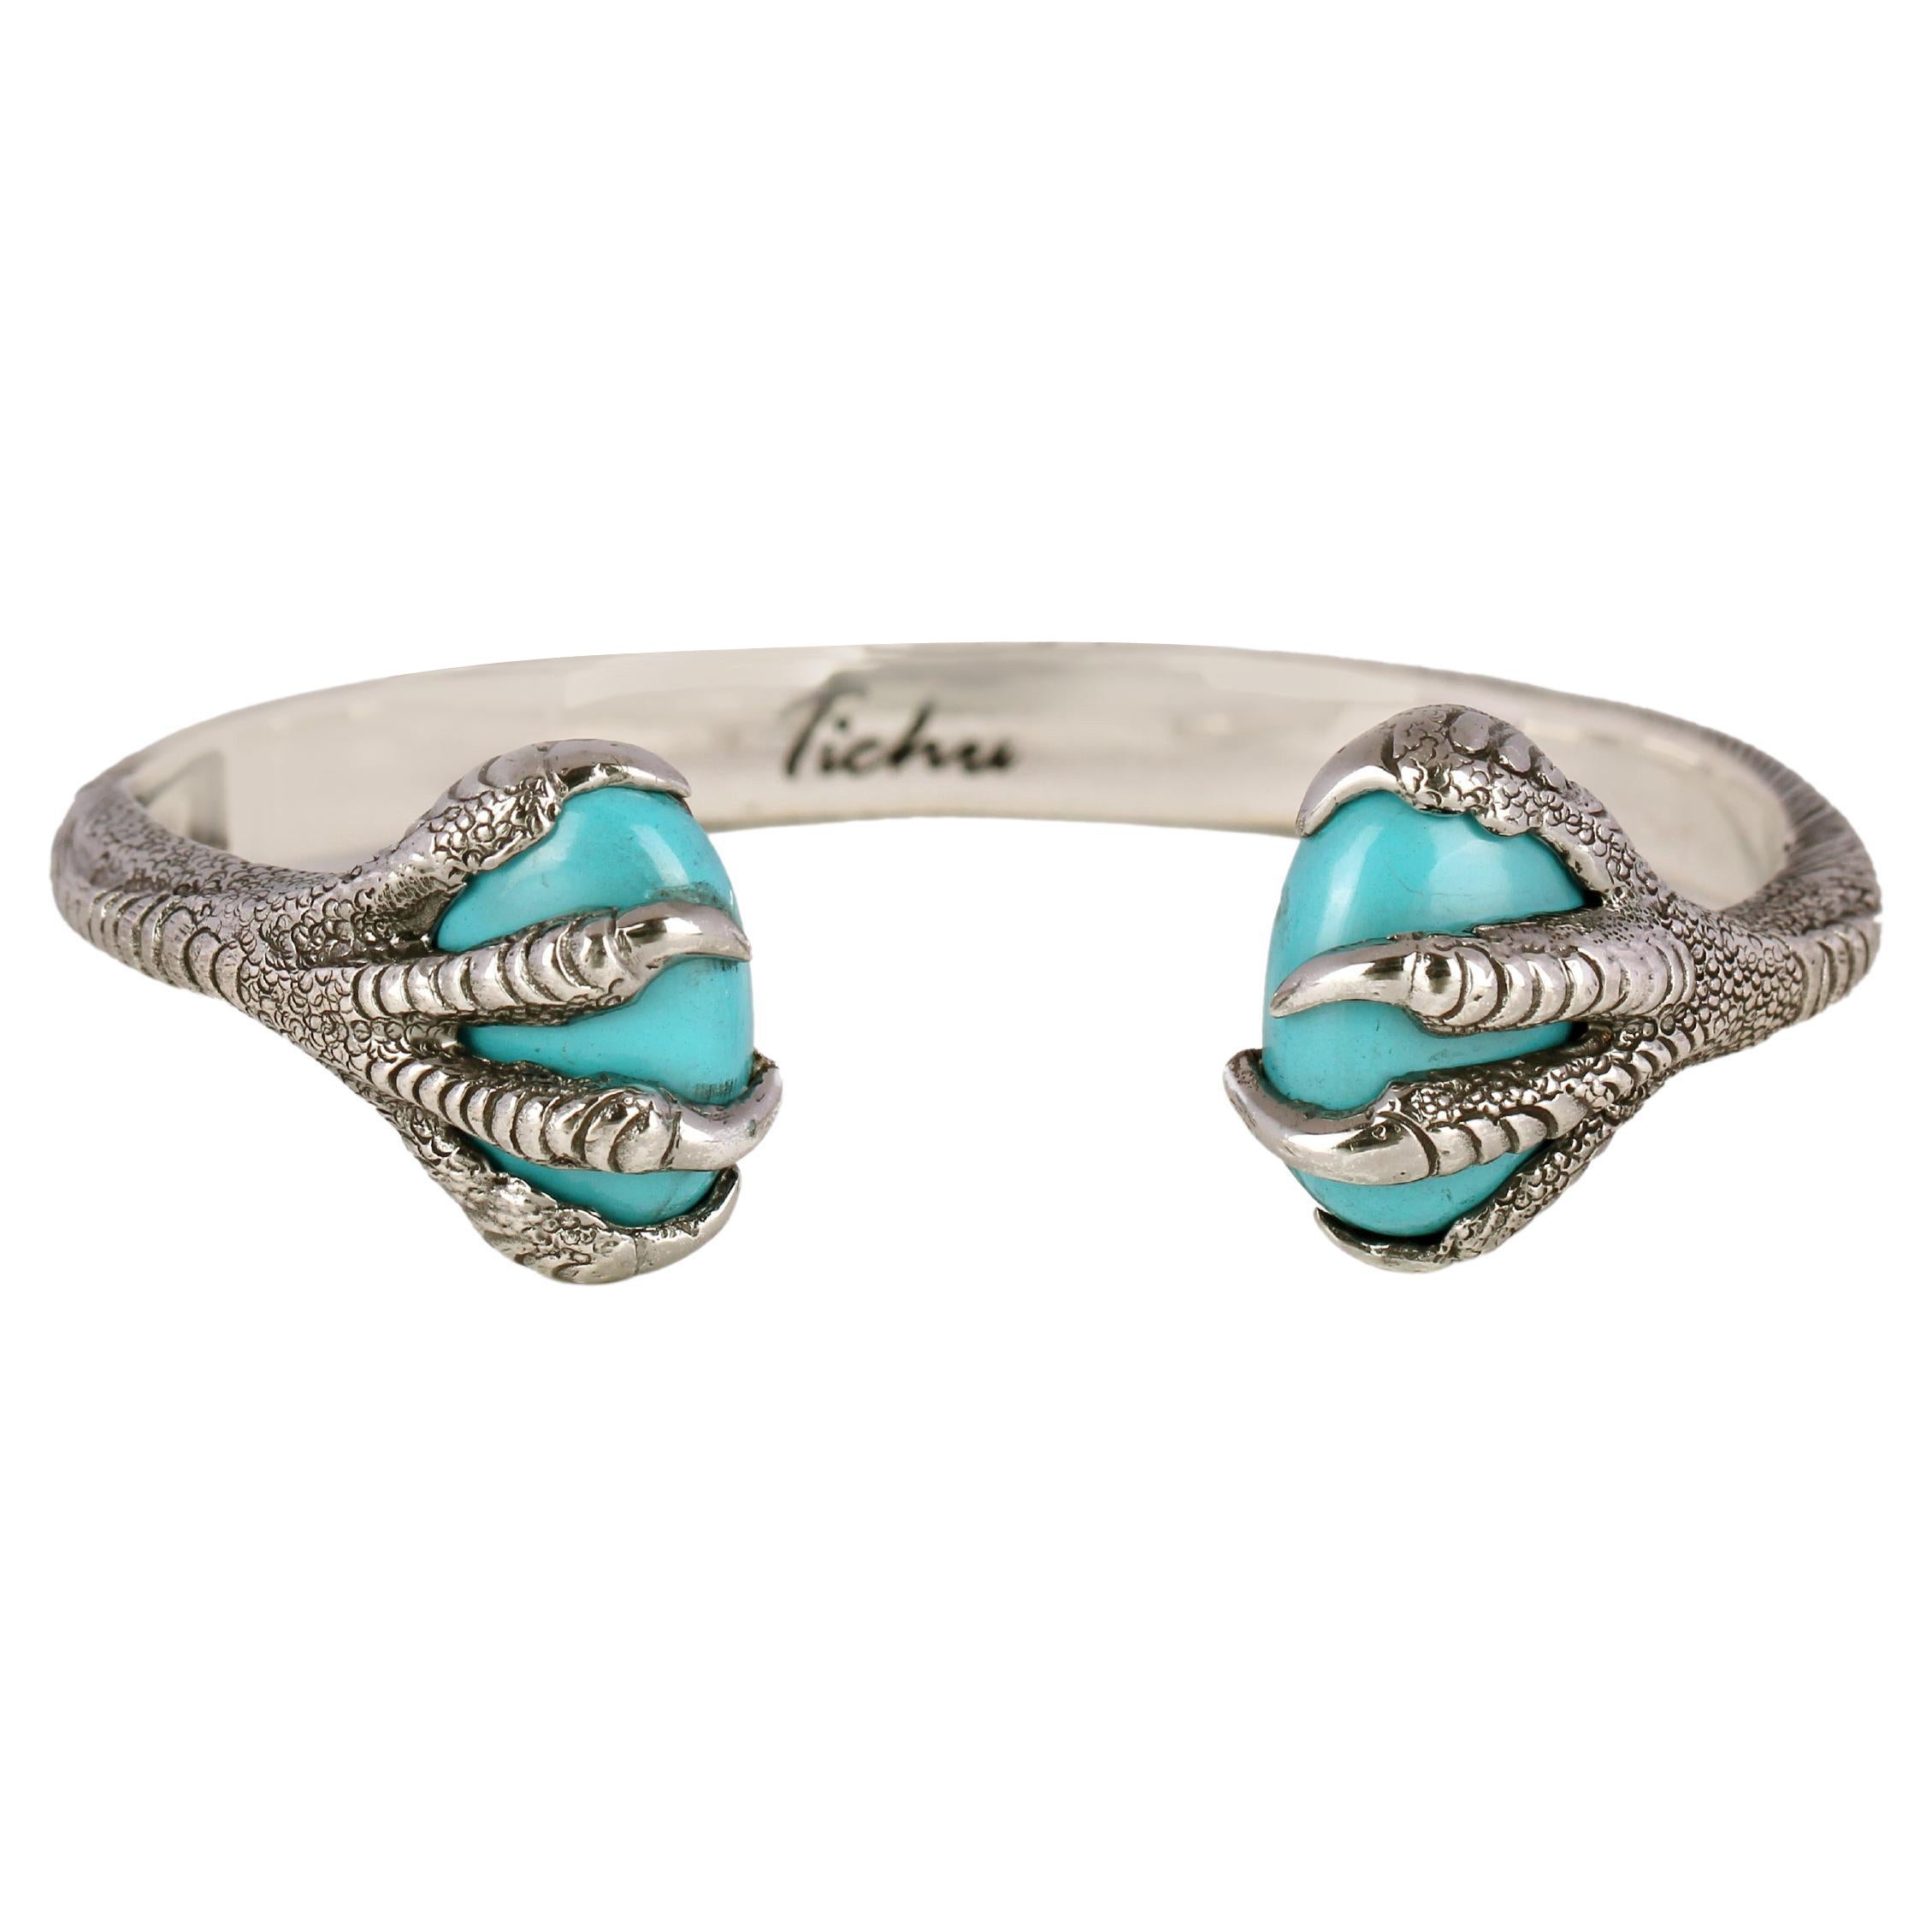 Tichu Turquoise Eagle Claw Cuff in Silver Sterling & Crystal Quartz, Size 'M' For Sale